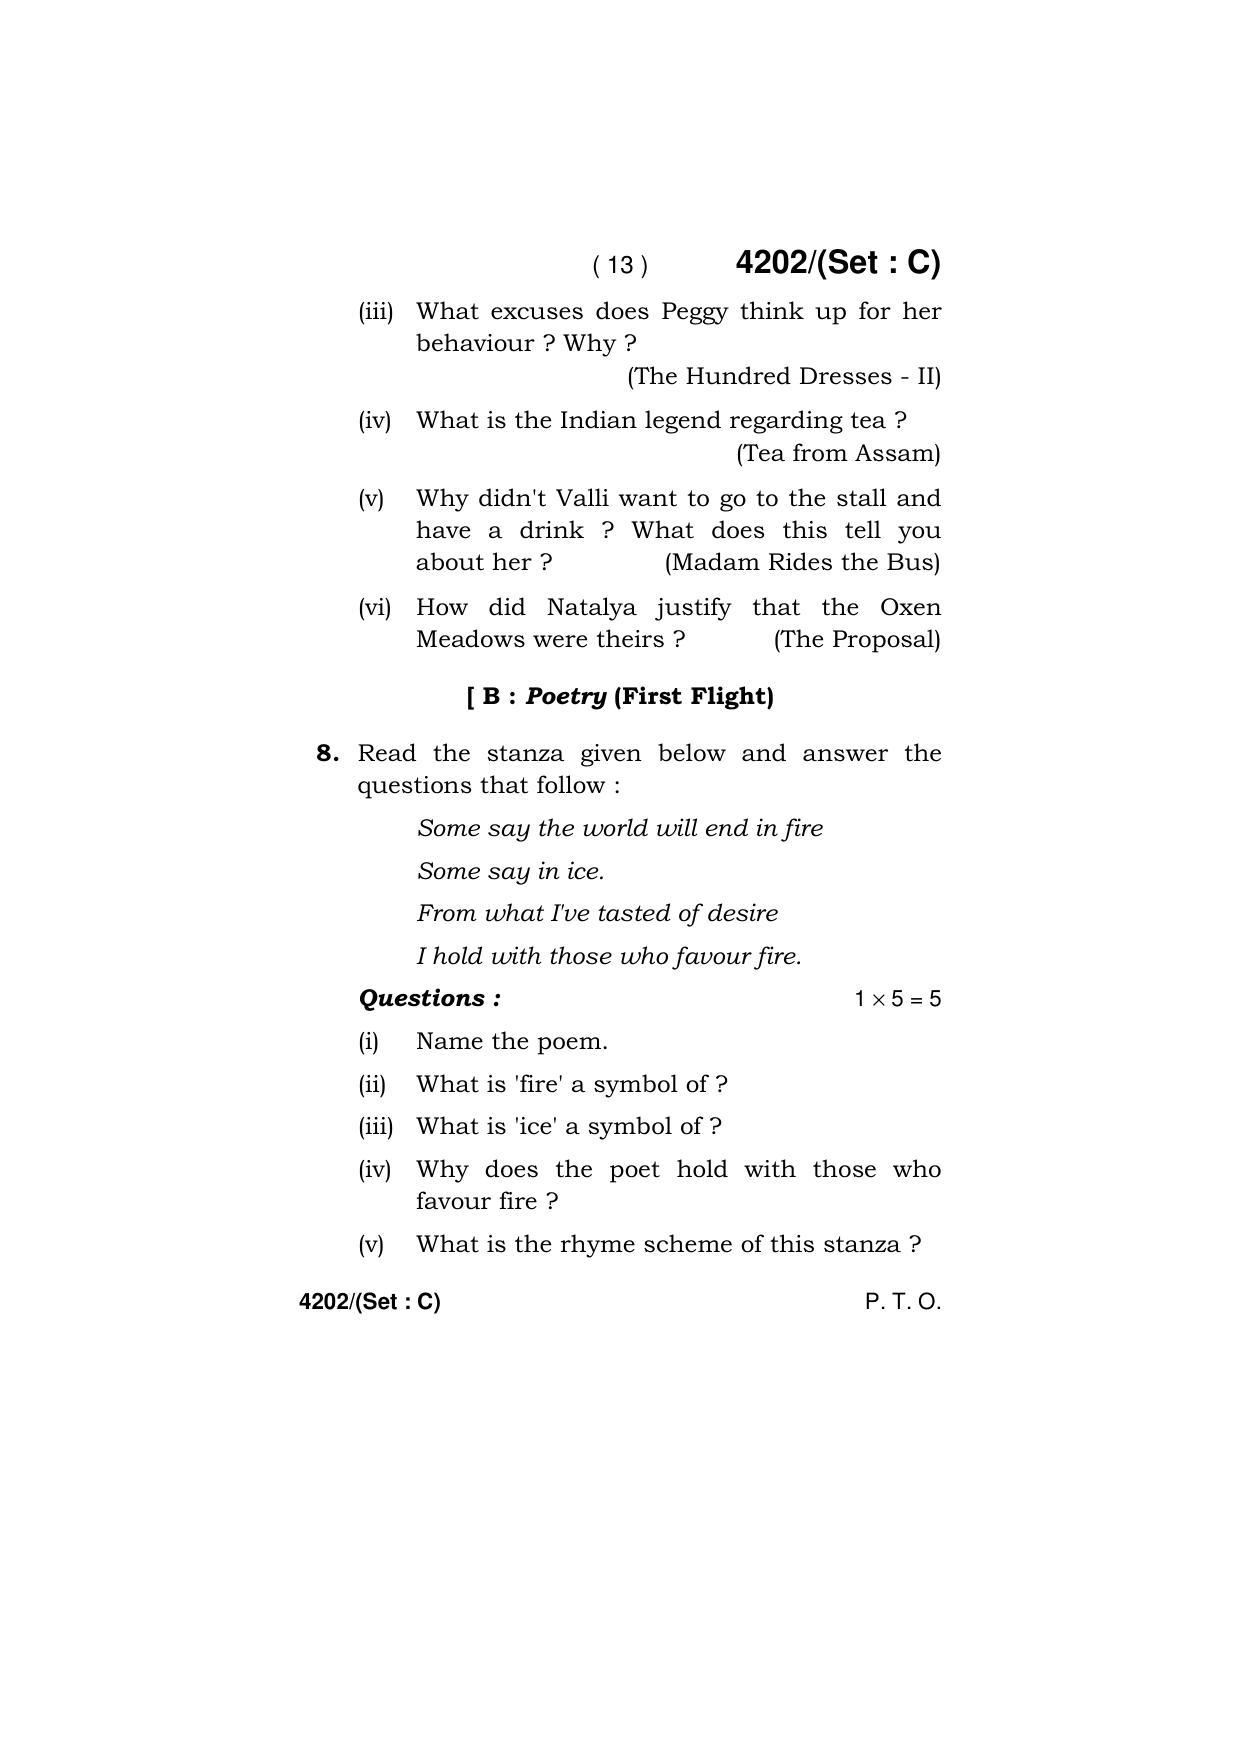 Haryana Board HBSE Class 10 English (All Set) 2019 Question Paper - Page 45